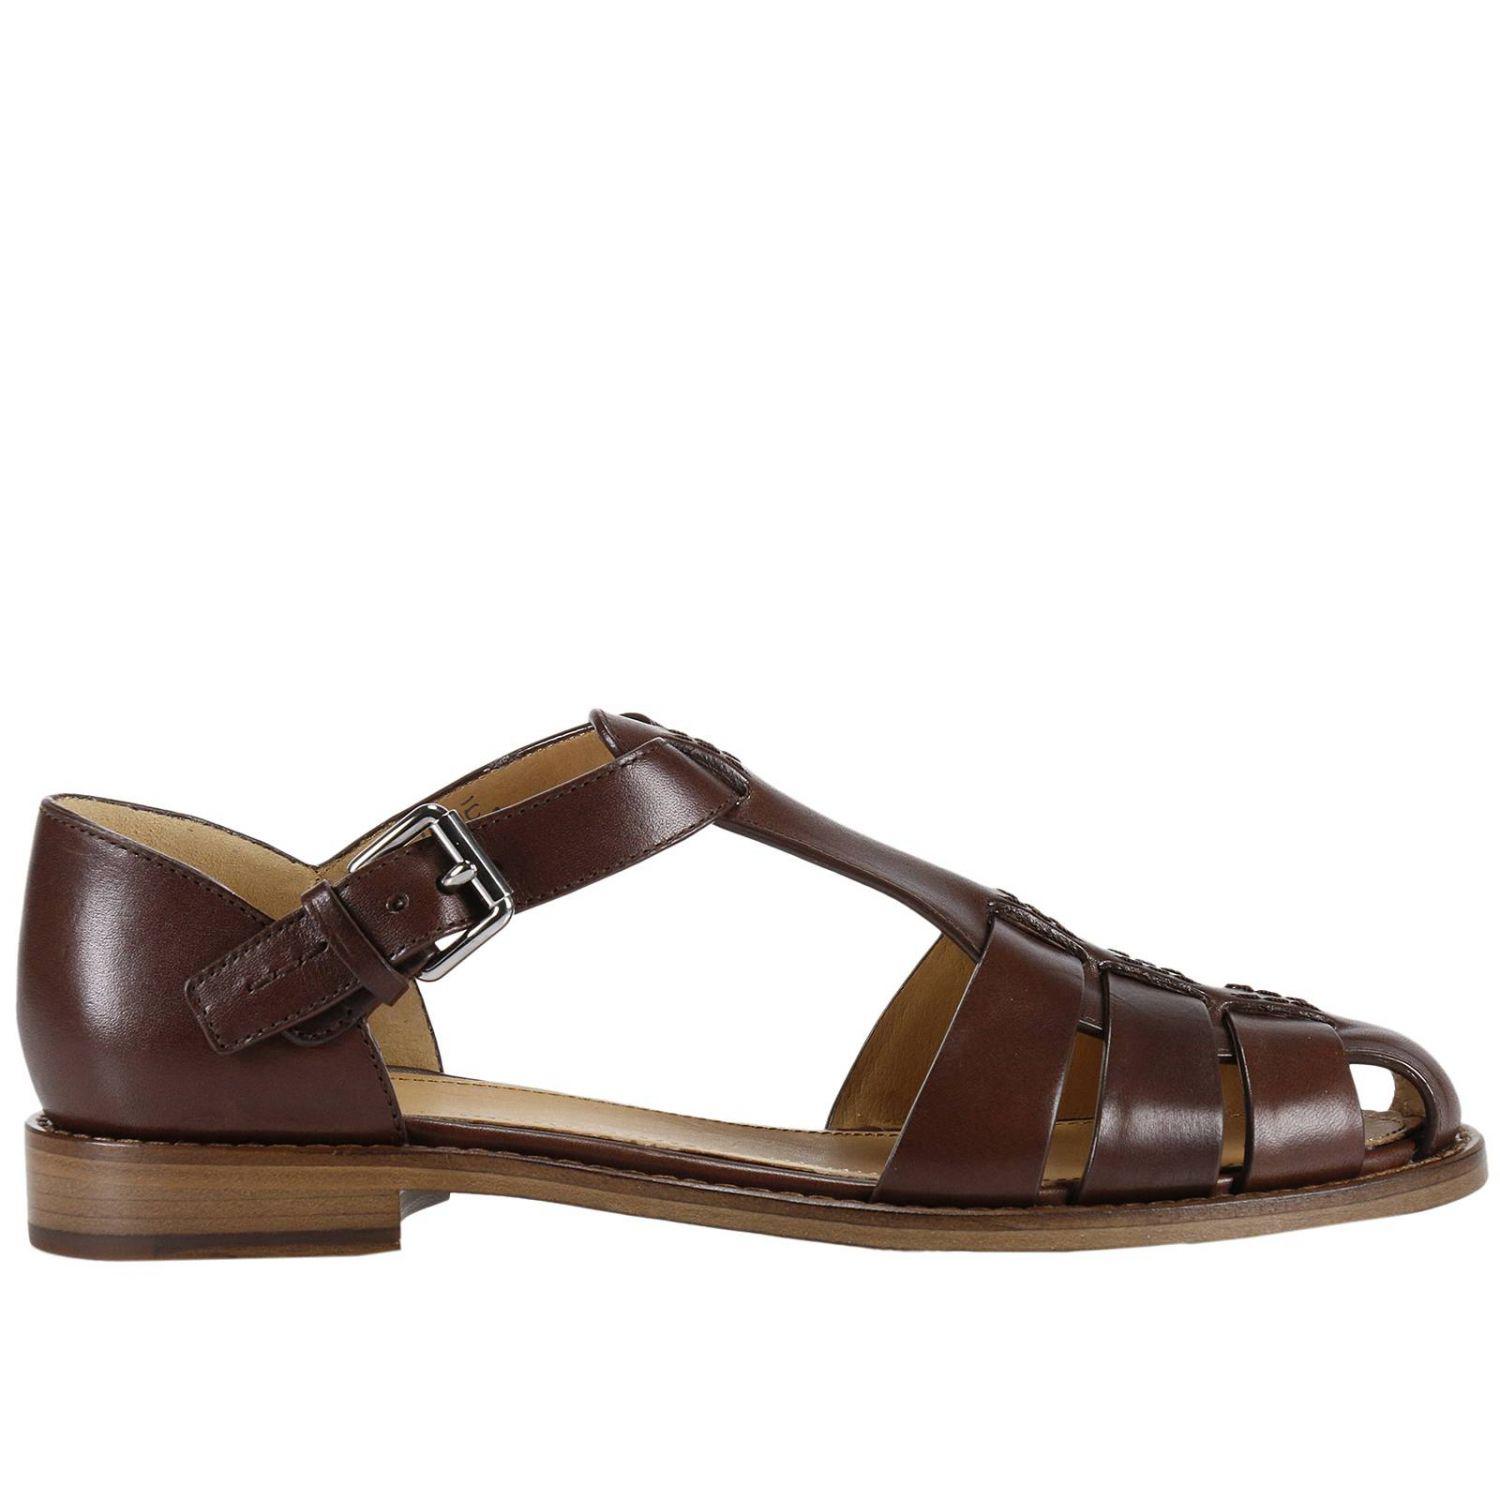 Lyst - Church'S Flat Sandals Shoes Women in Brown